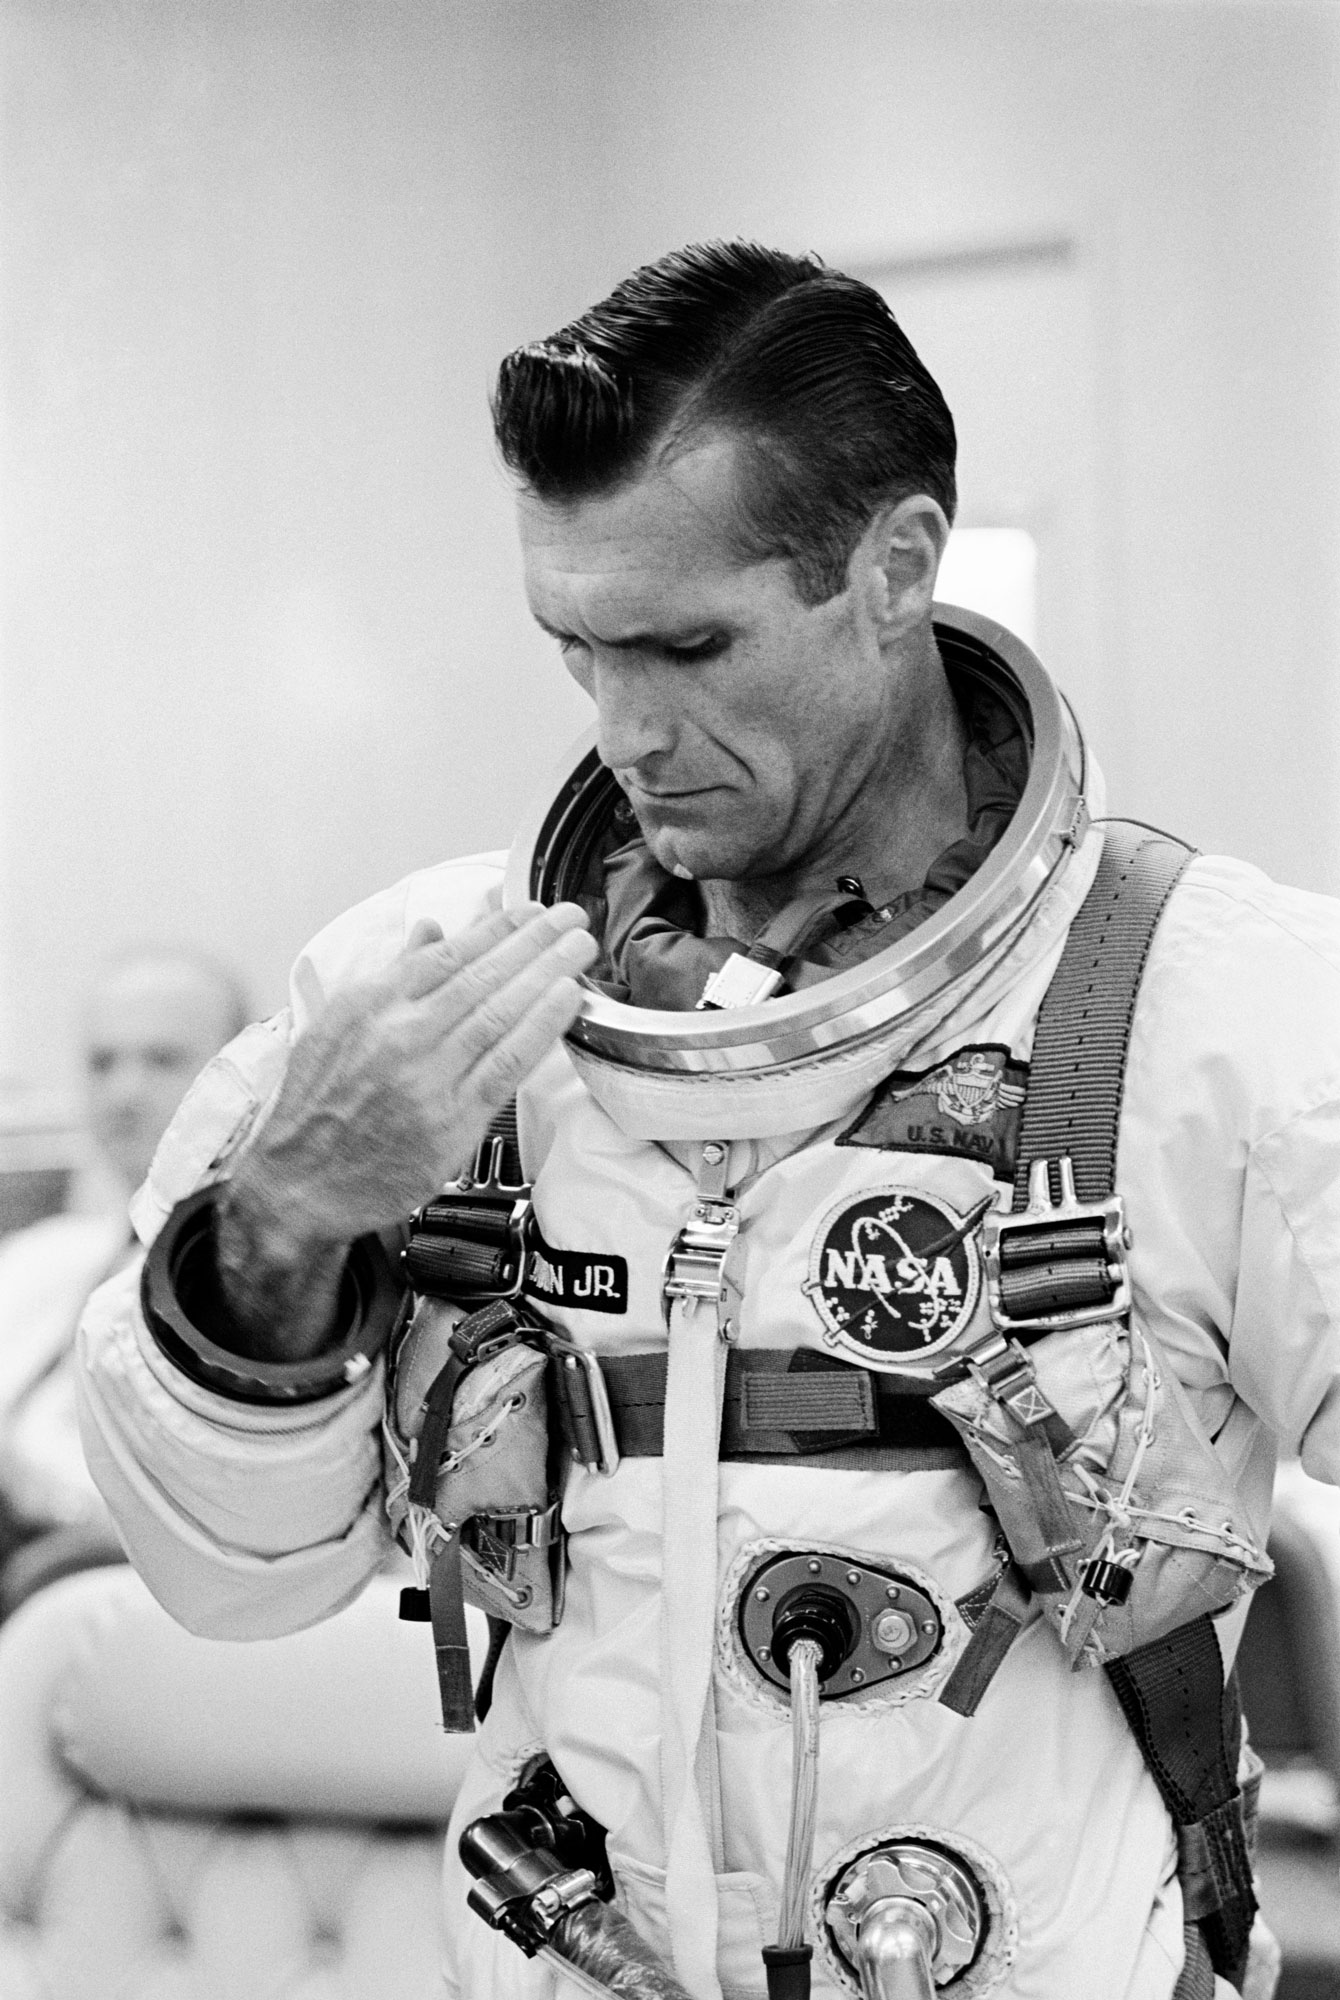 A black and white photograph shows a man inspecting his space suit